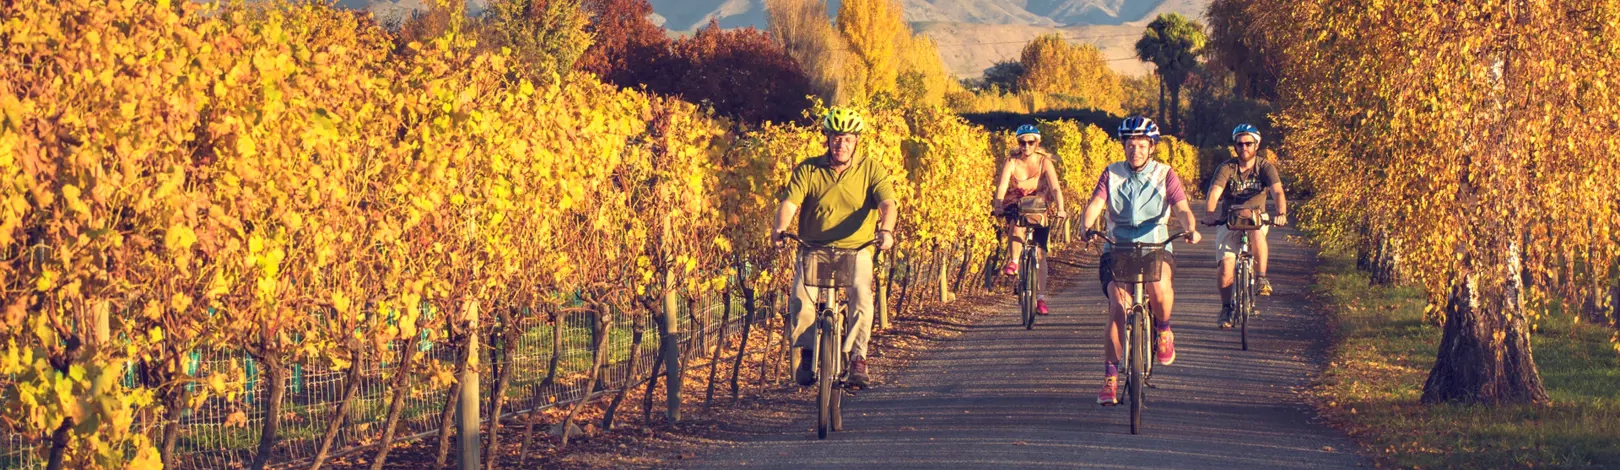 OP F C MDC Bike Winery Autumn Must Be Only Marlborough Horizontal Branded(45)